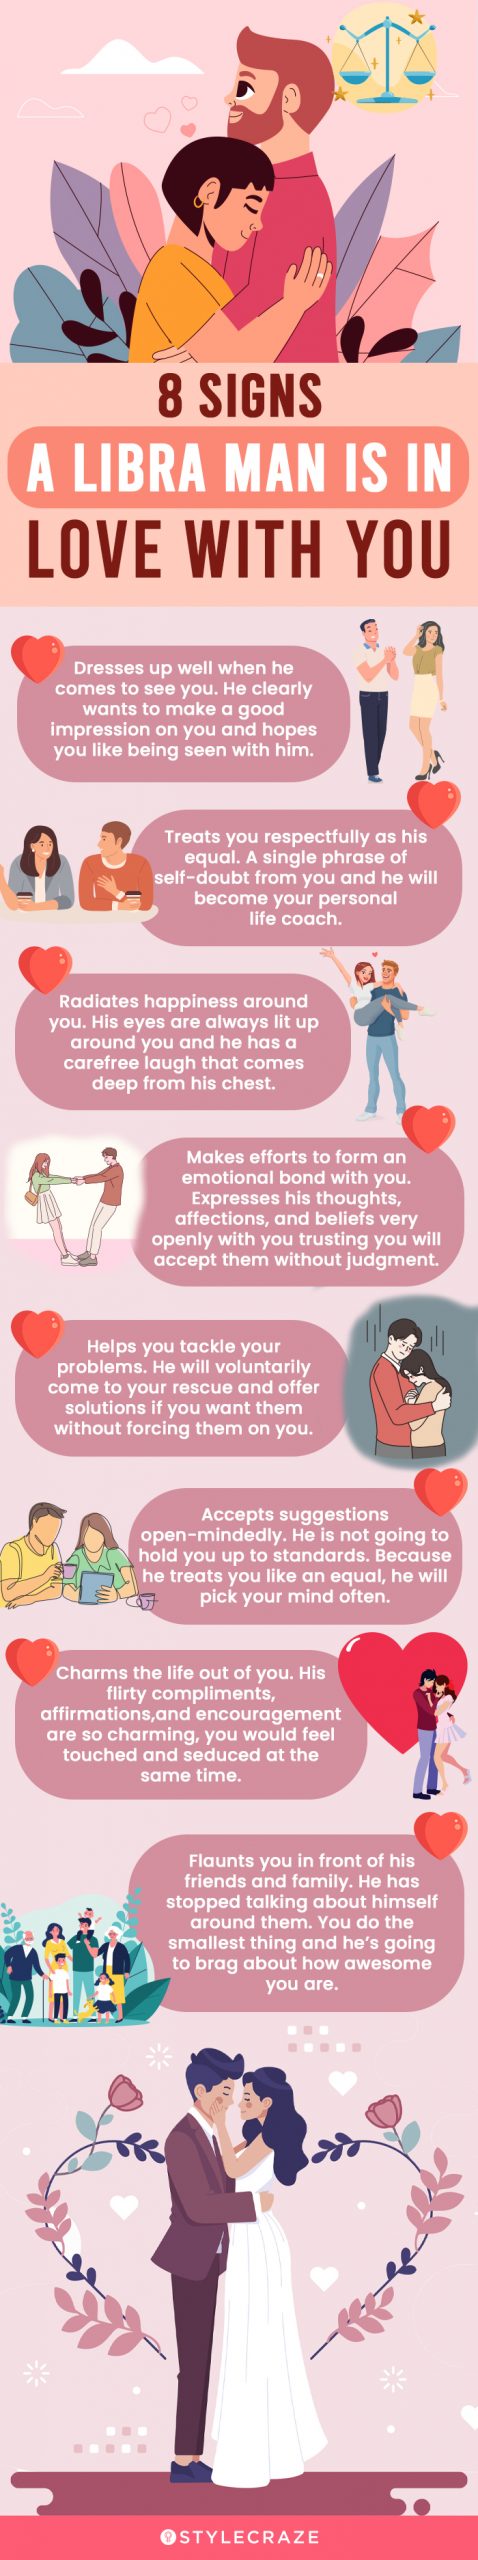 8 signs a libra man is in love with you (infographic)